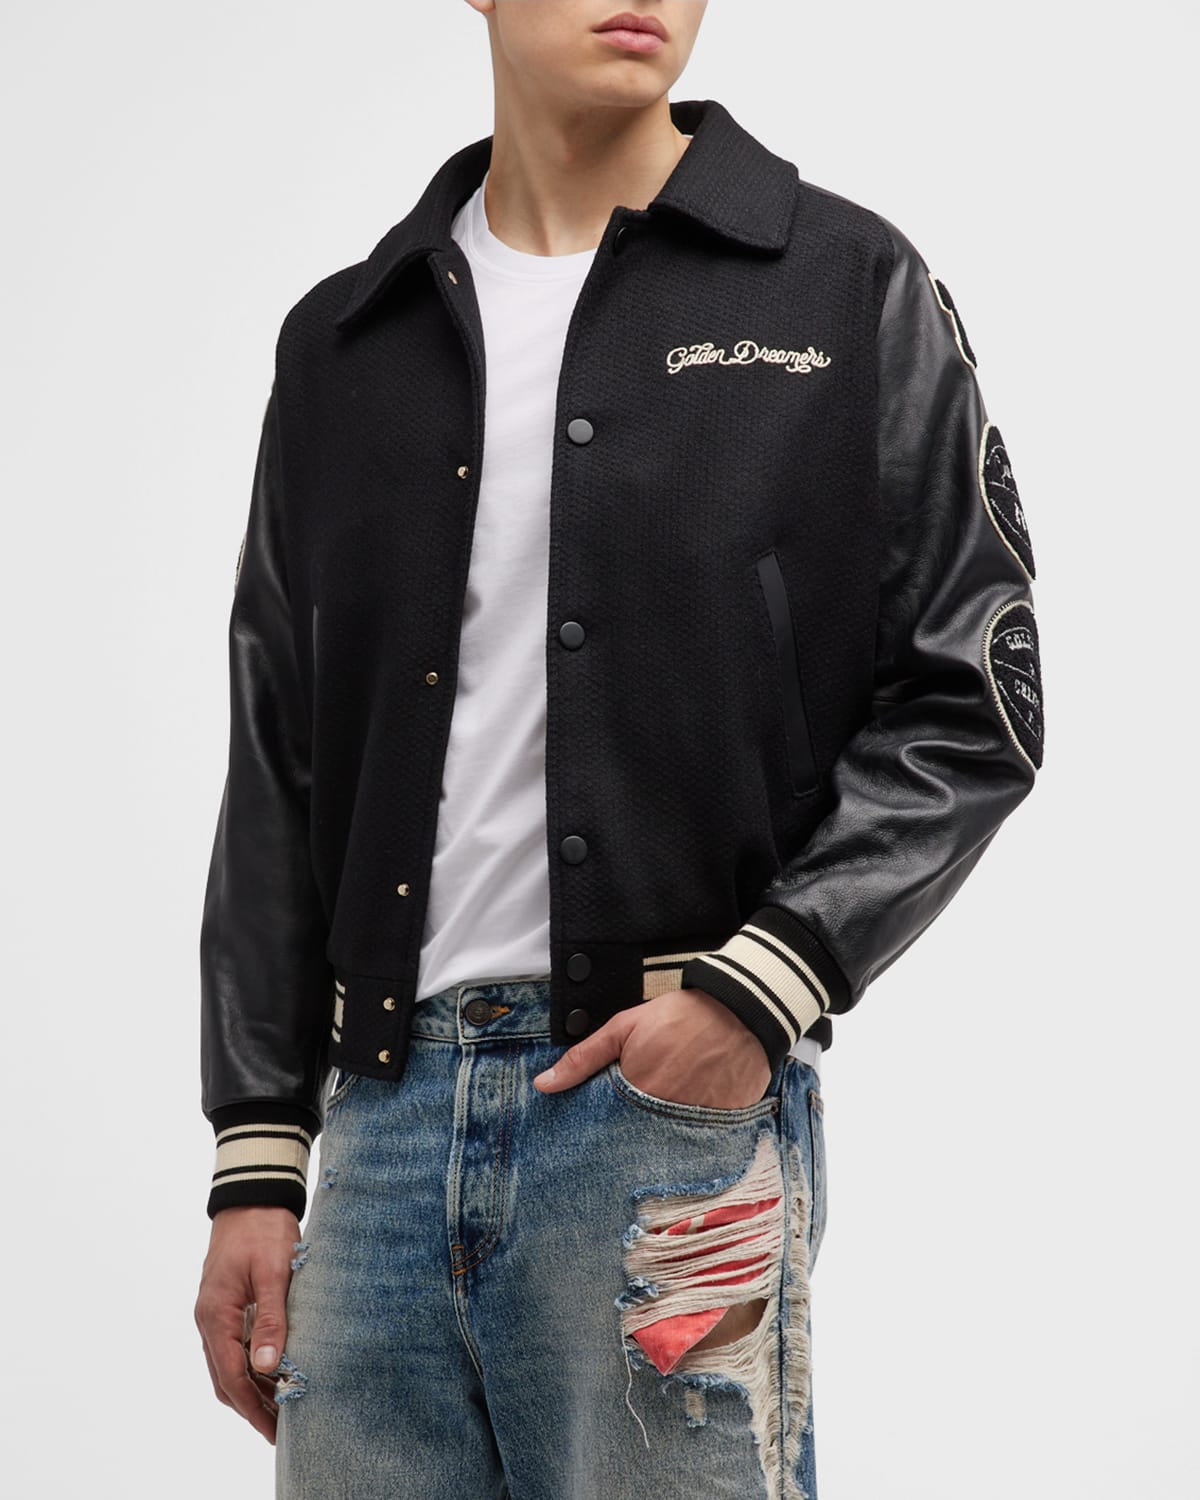 Men's Bomber Jacket with College Patches